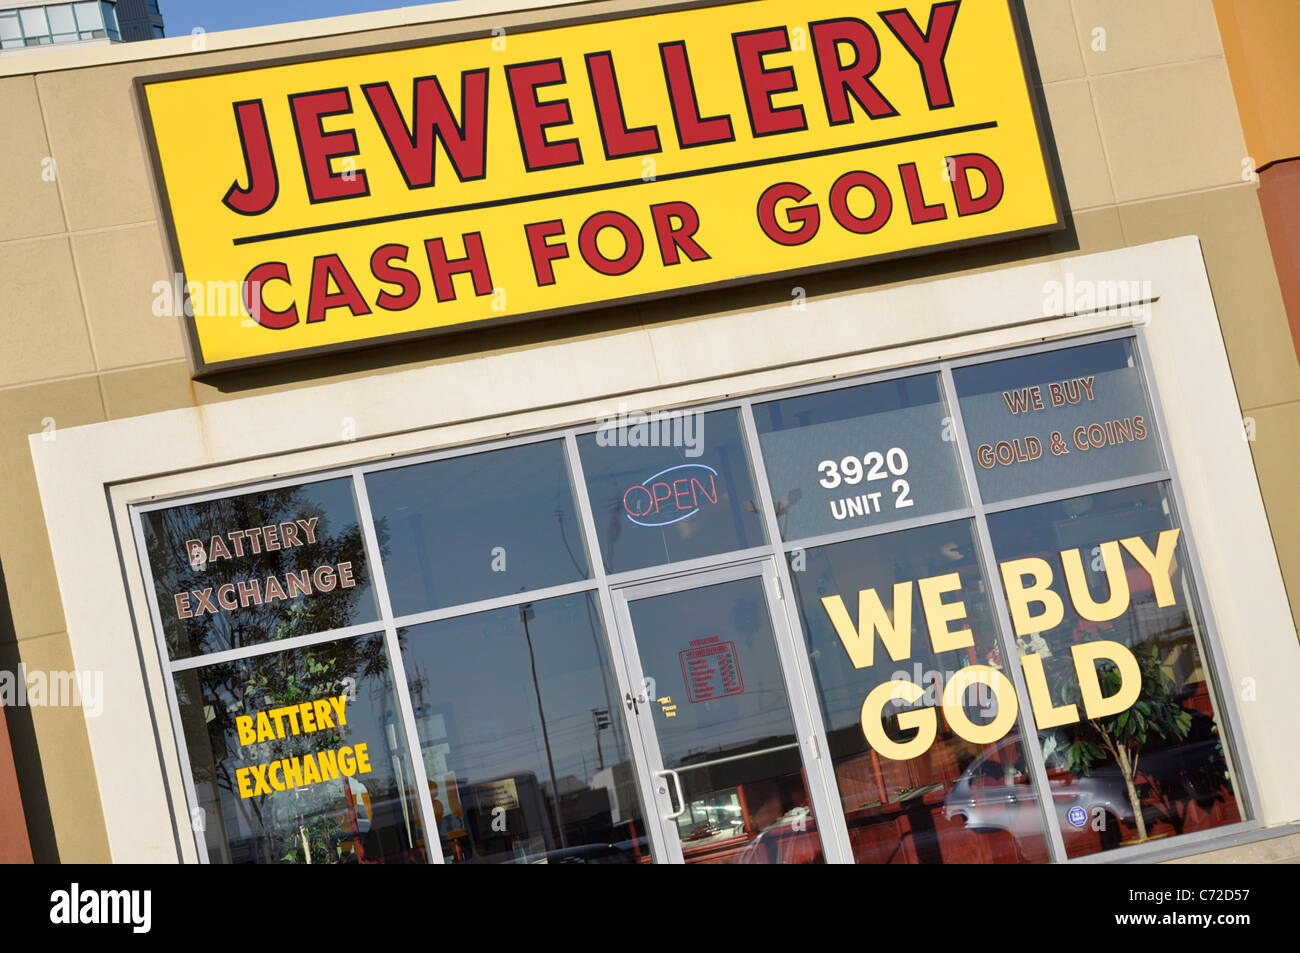 CASH FOR GOLD BANNER SIGN pawn shop jewelry store we buy fast cash paid ring